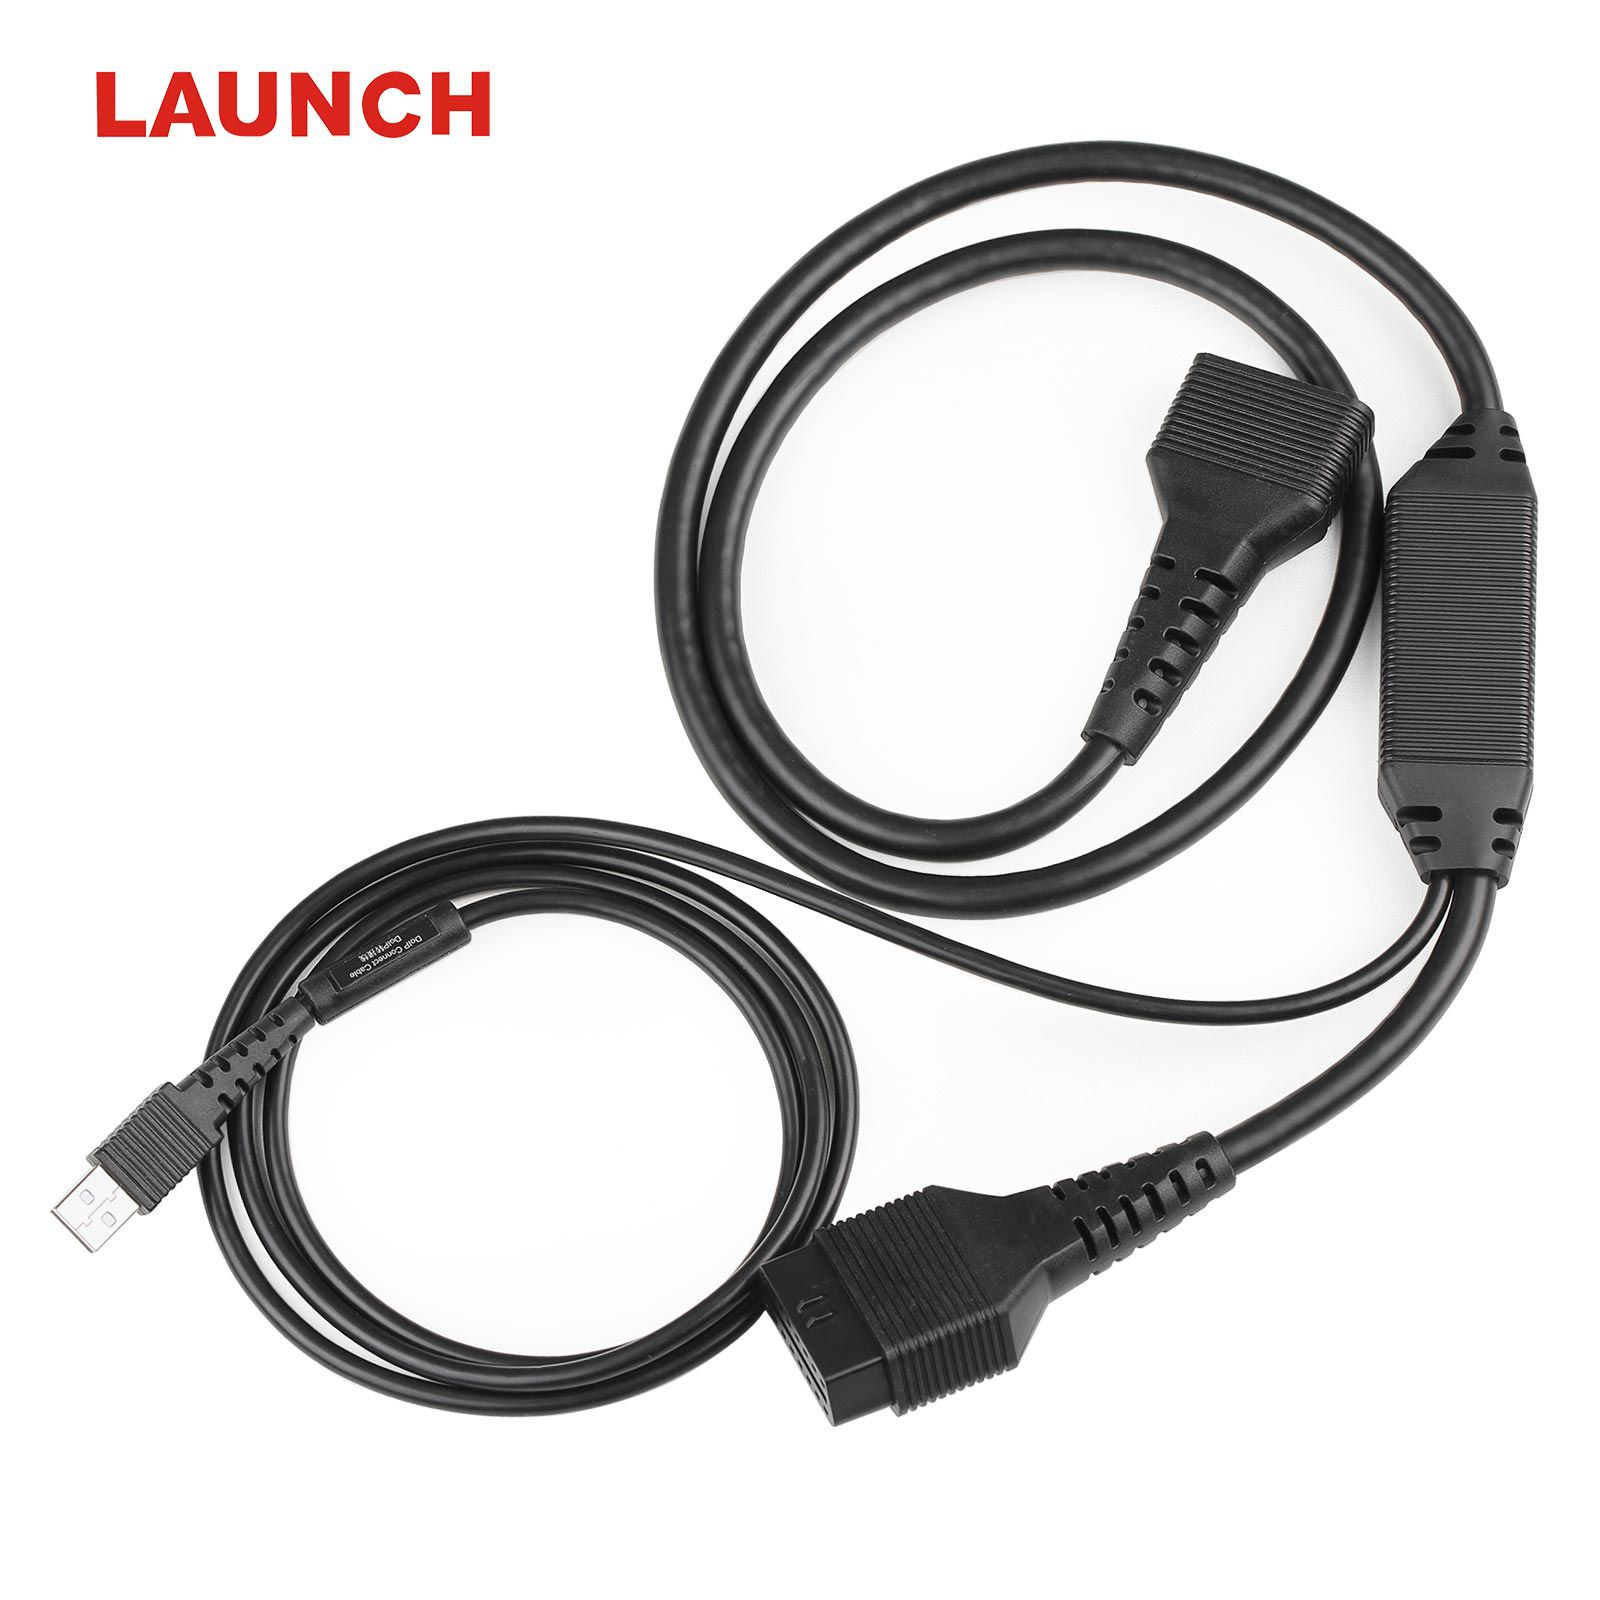 2024 LAUNCH DOIP Adapter Cable for Devices with CAR VII Bluetooth Connectors